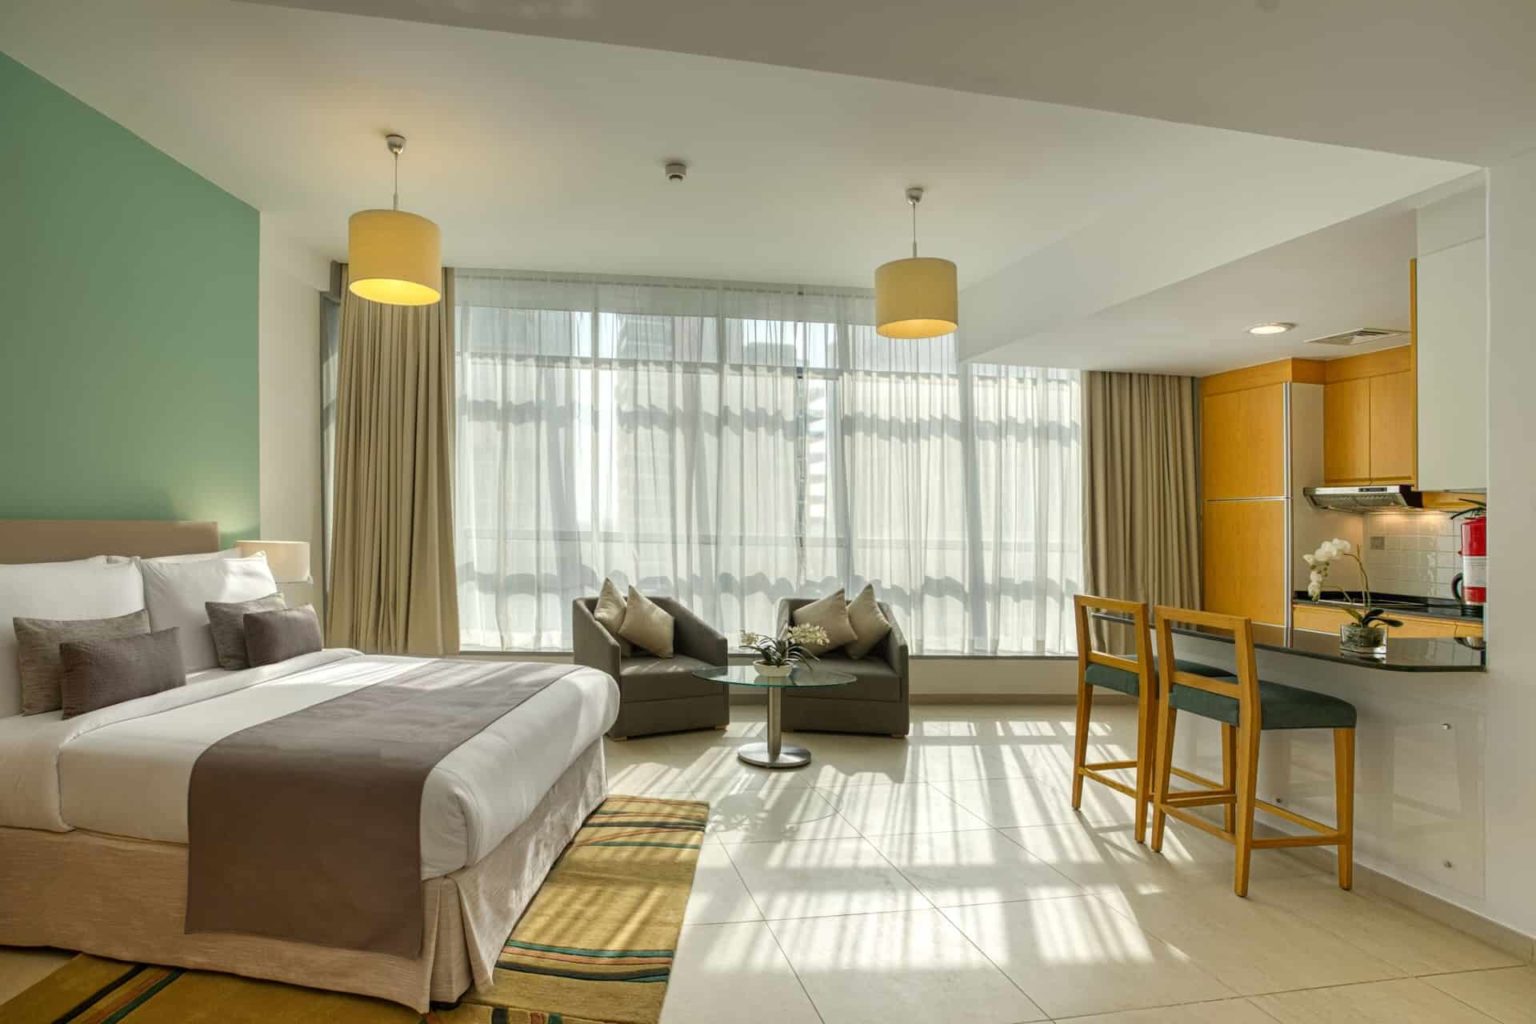 Grand Heights Hotel Apartments deluxe studio suite with bed and kitchenette